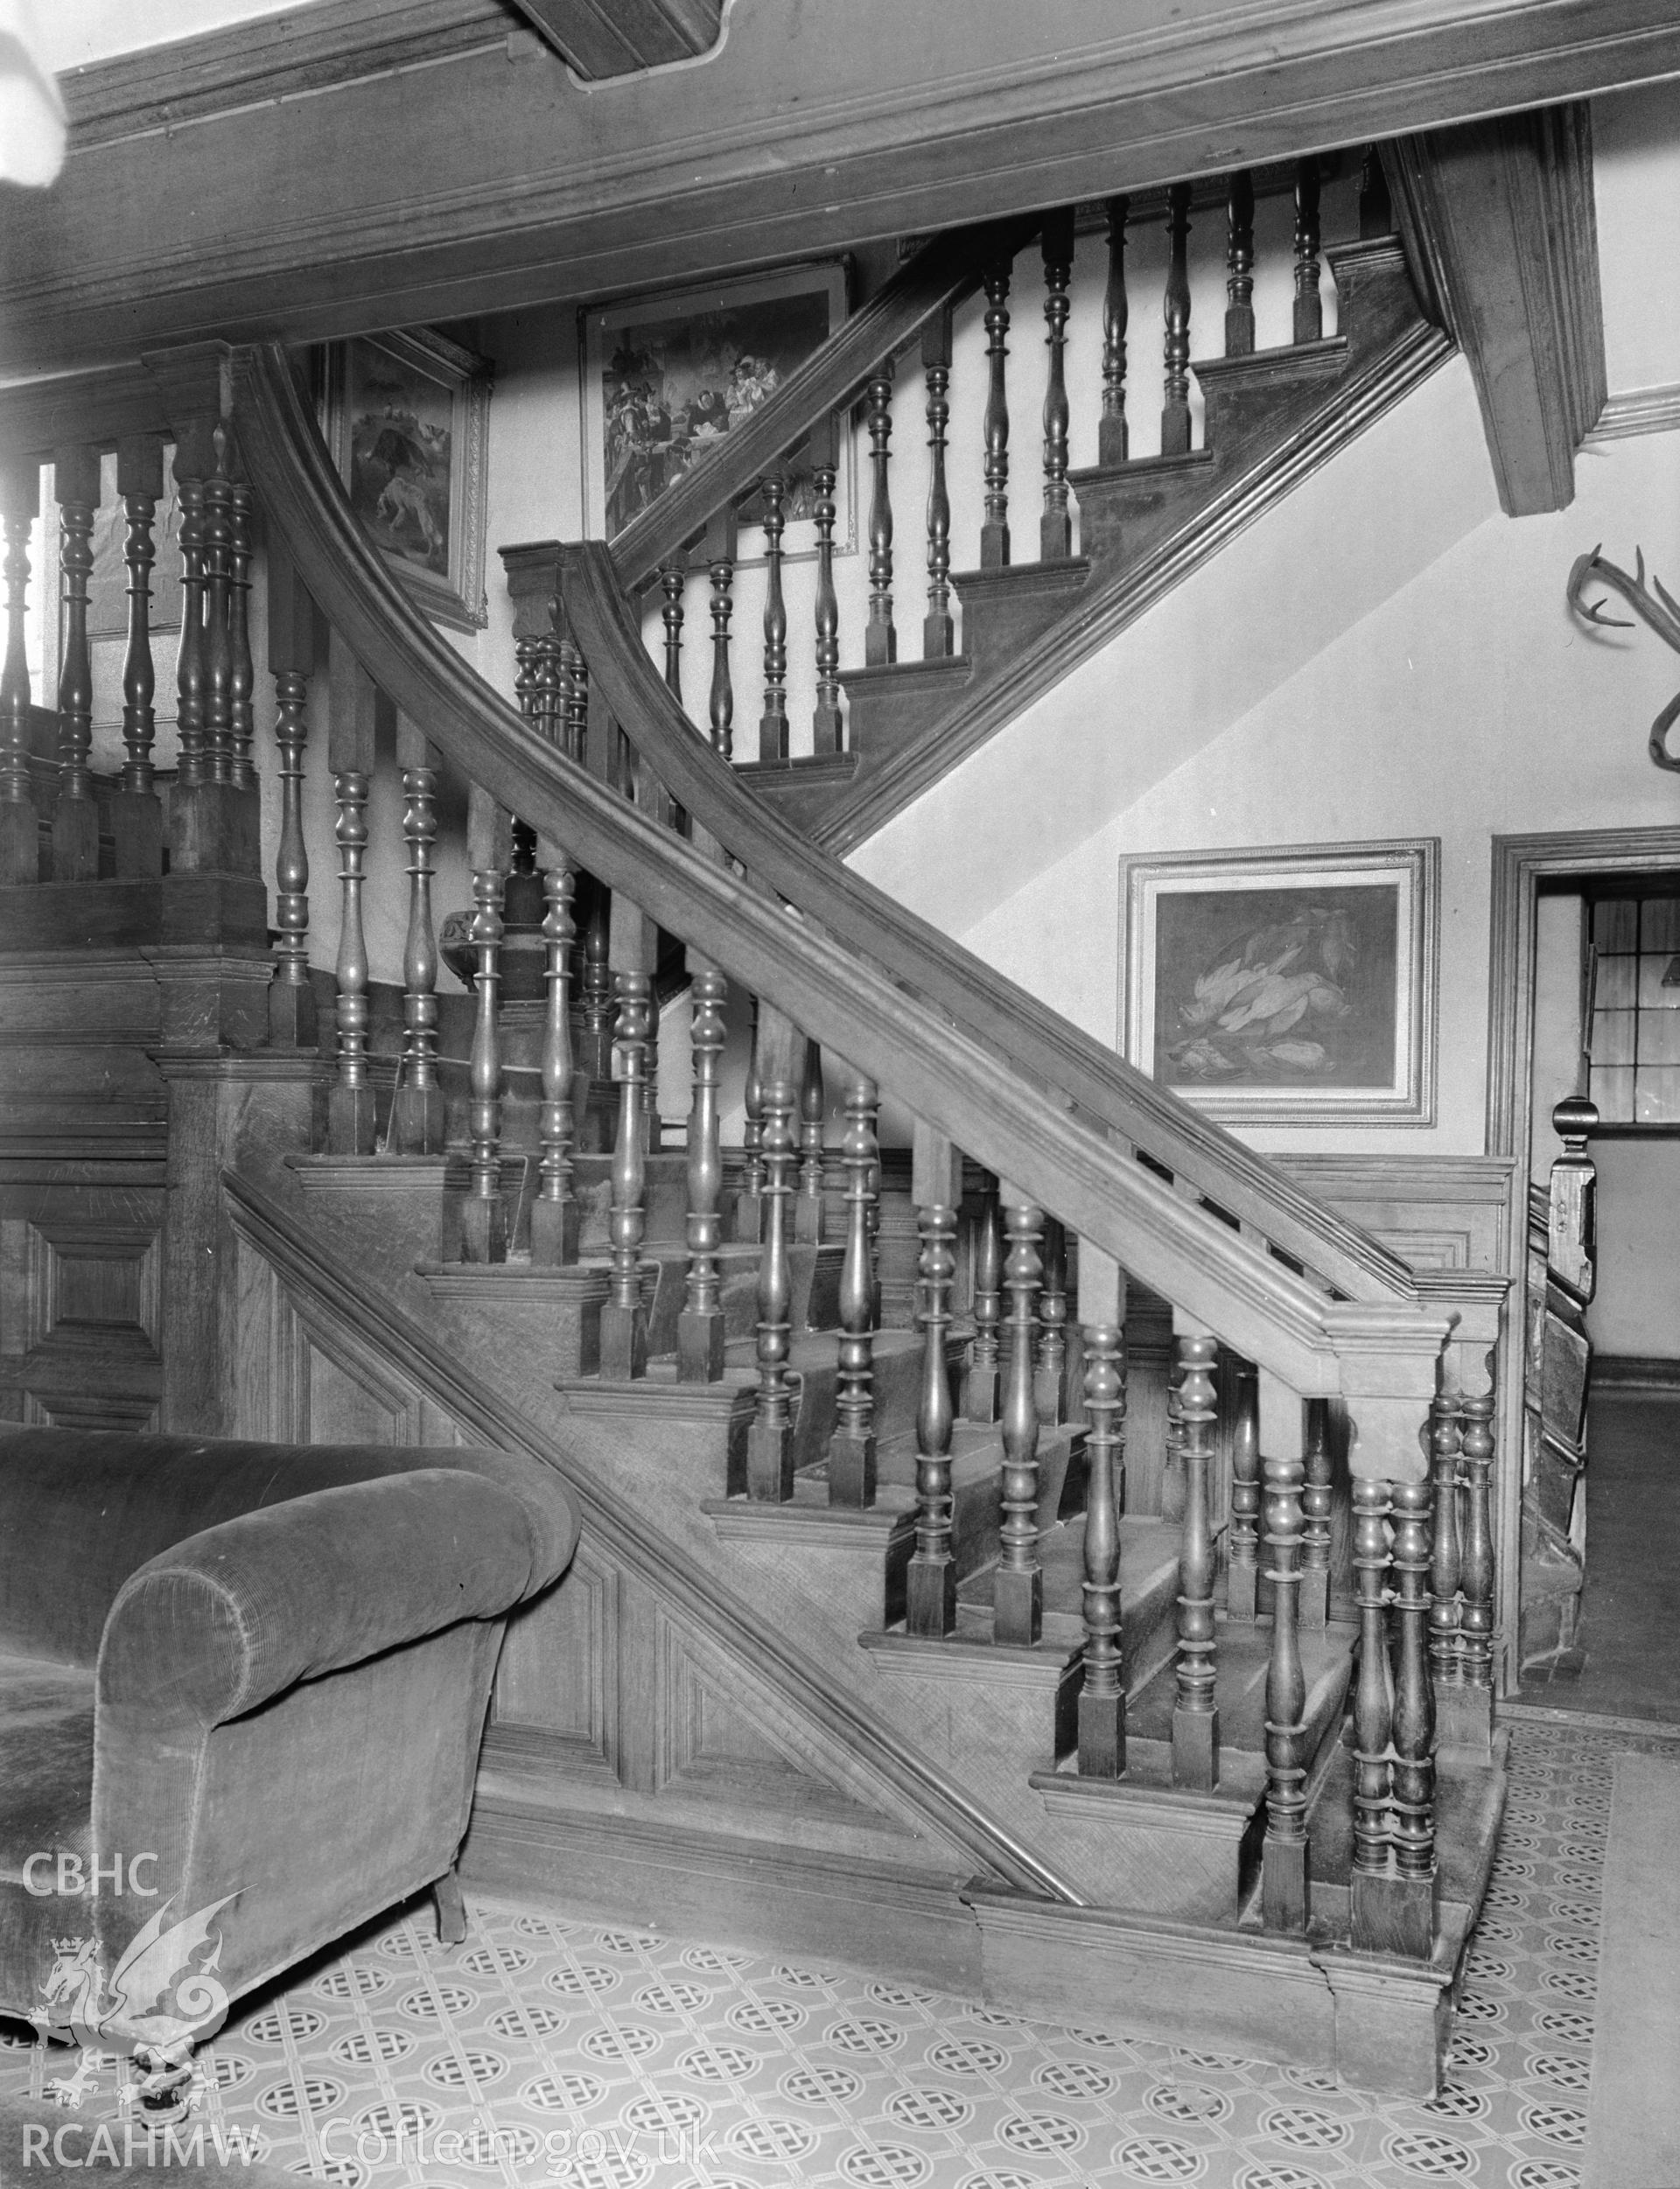 Interior view, showing staircase